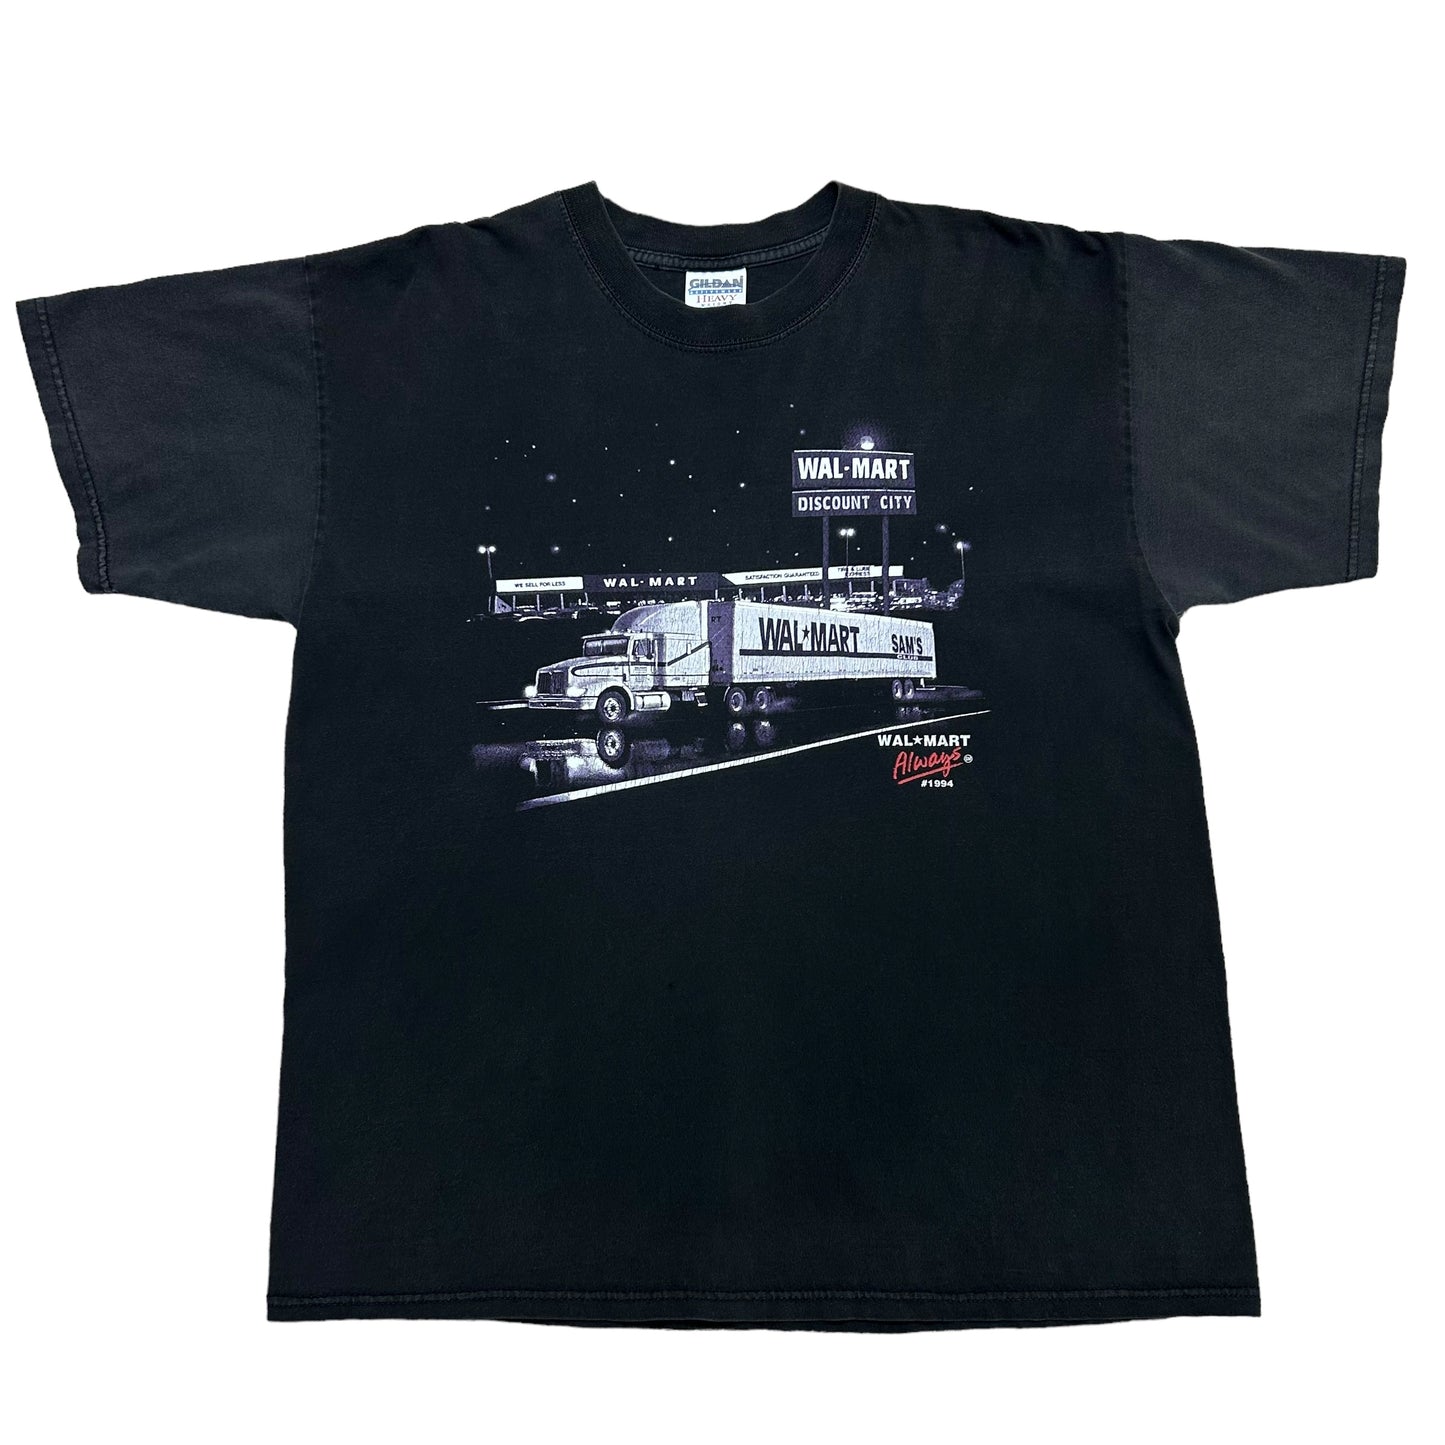 Vintage 1990s Wal-Mart Tractor Trailer Black Graphic T-Shirt - Size XL